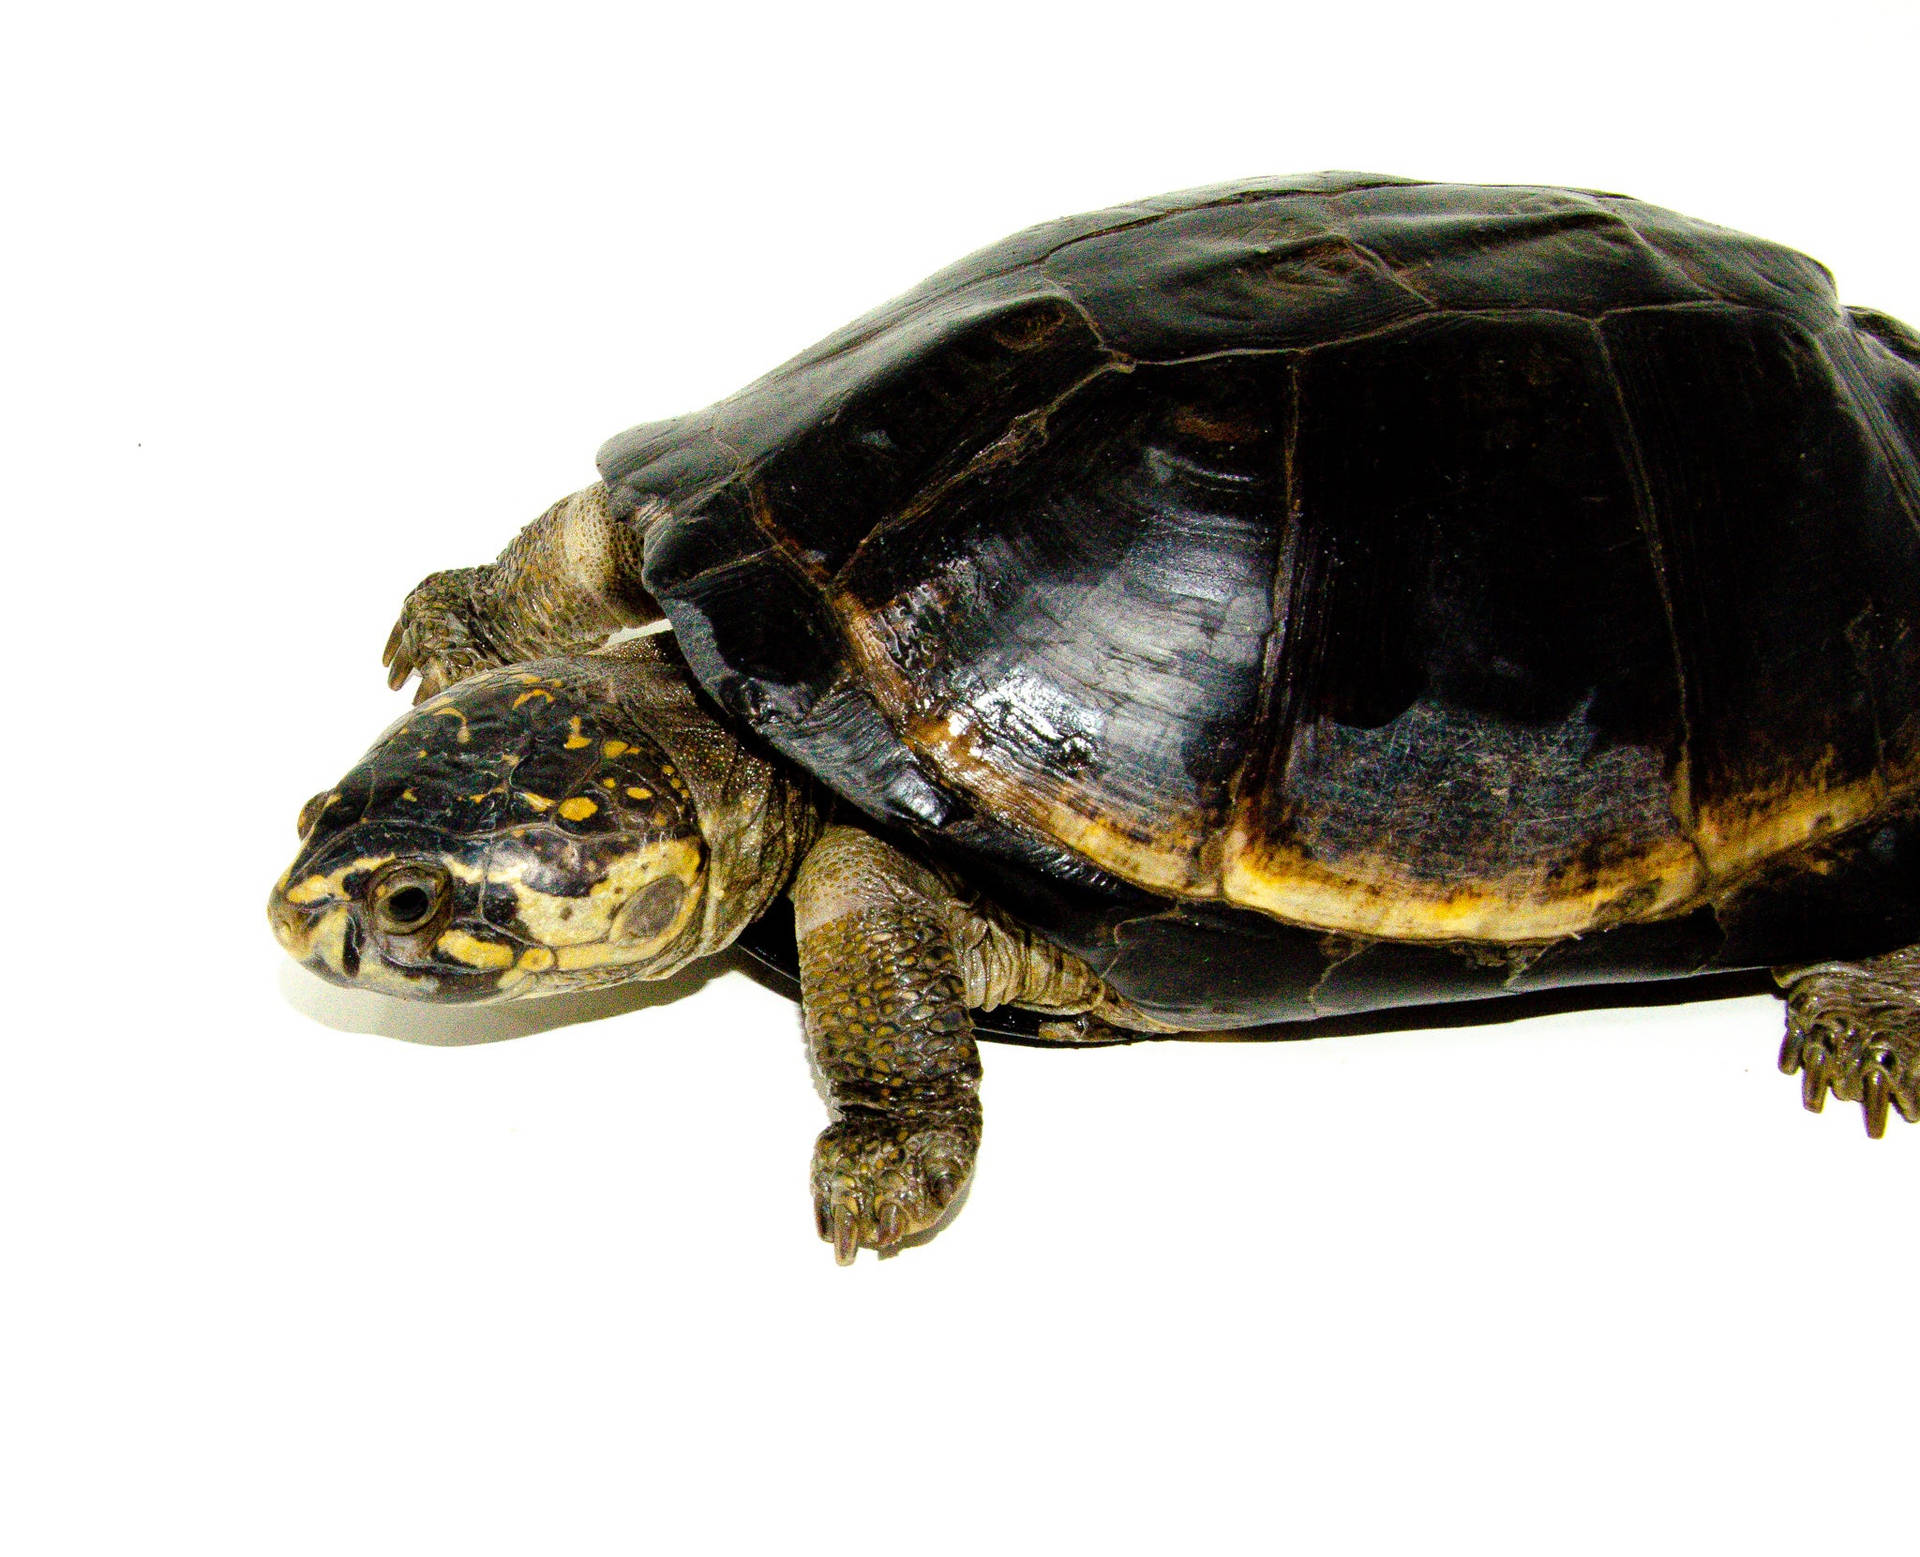 Mud Turtle With A Two-tone Shell Wallpaper